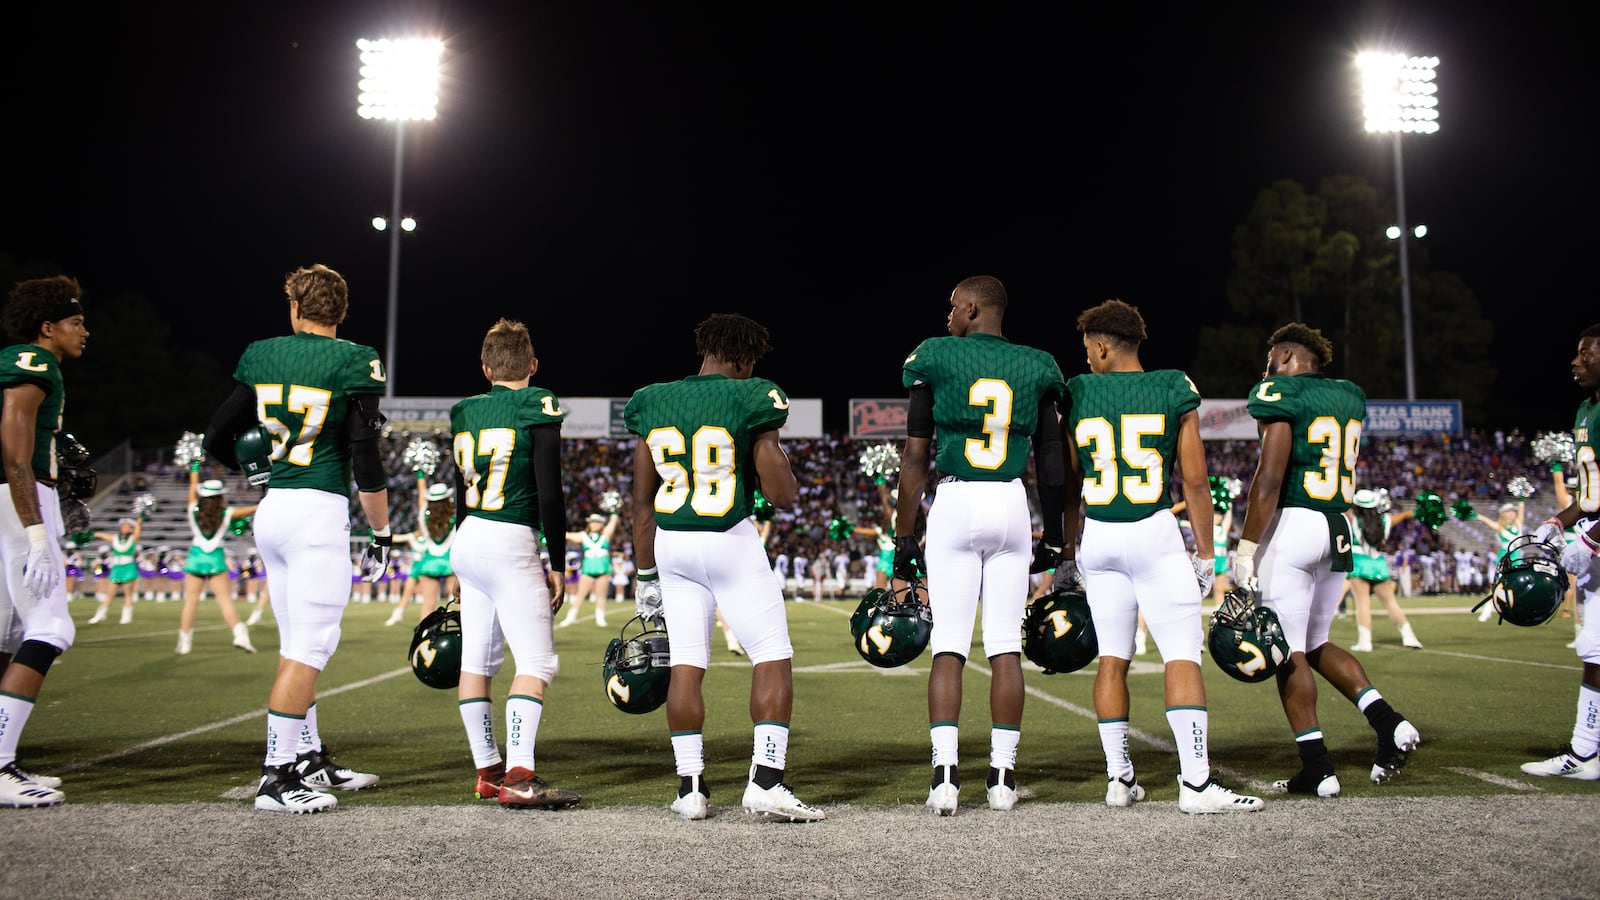 The football season opener at Longview High School on Aug. 31, 2018. This year, a 1970 federal desegregation order was lifted for Longview ISD.